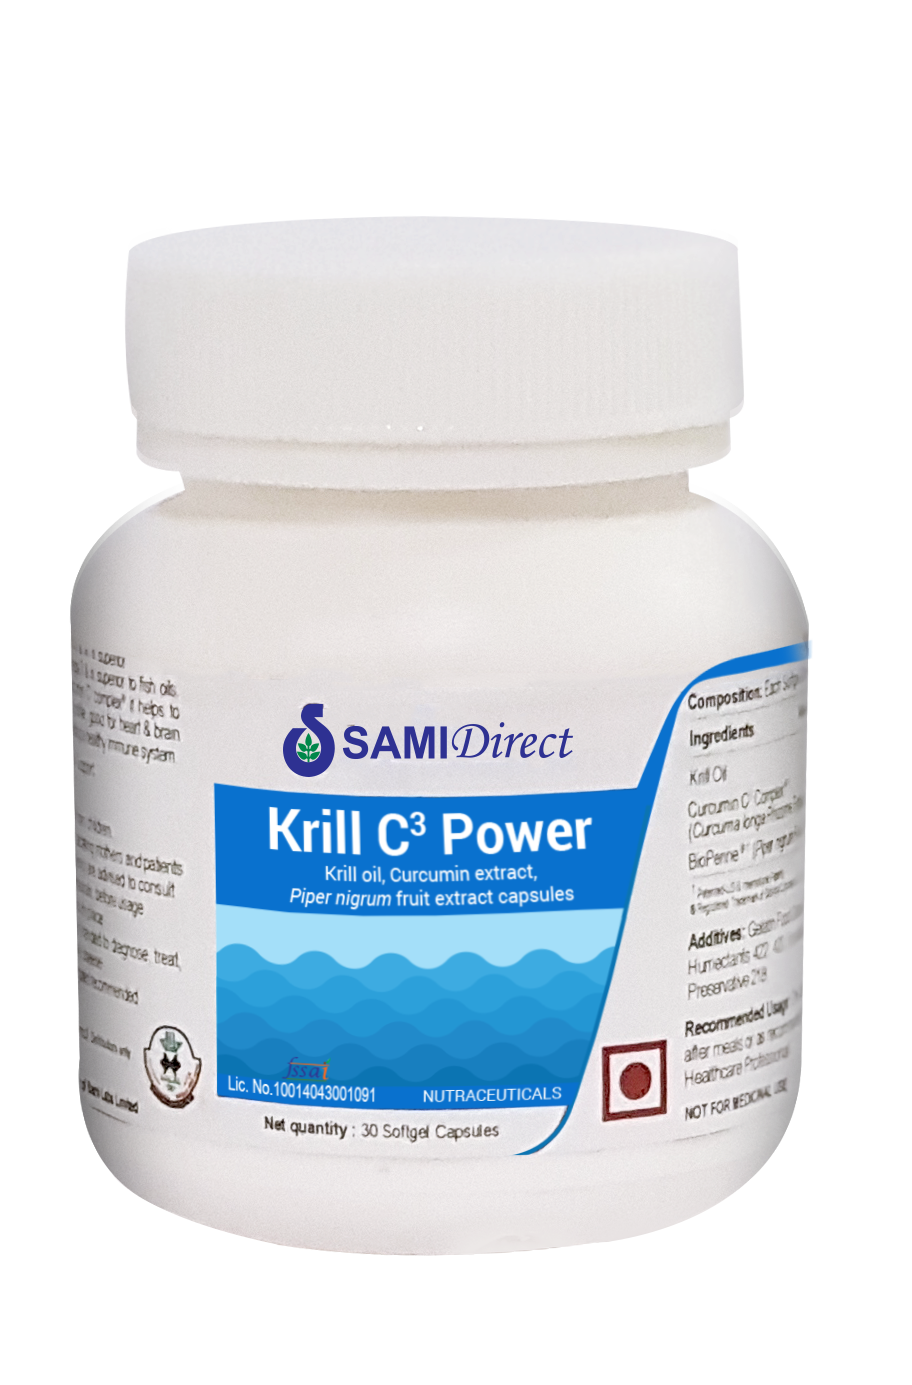 sami-direct-launches-krill-c3-power